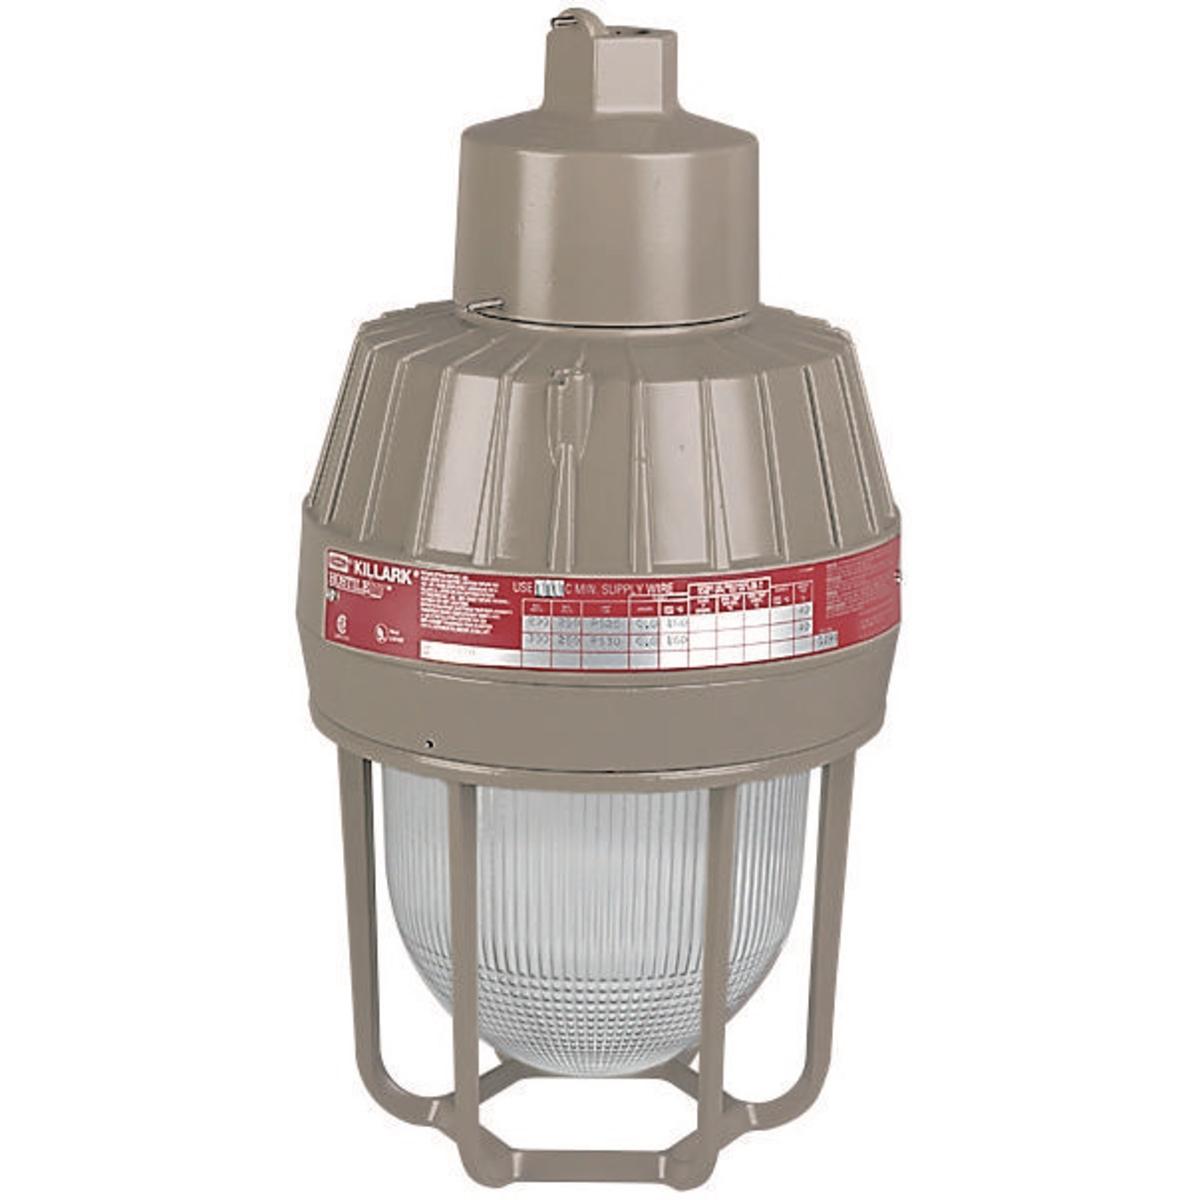 Hubbell EMI15A2G SU104 Class I 150W Incandescent 3/4" Pendant with Guard- Unit Pack  ; Four light sources—Incandescent, compact fluorescent, high pressure sodium and metal halide ; Mounting choice—Pendant, ceiling, 25˚ stanchion or 90˚ wall mount, all with “wireless” design tha